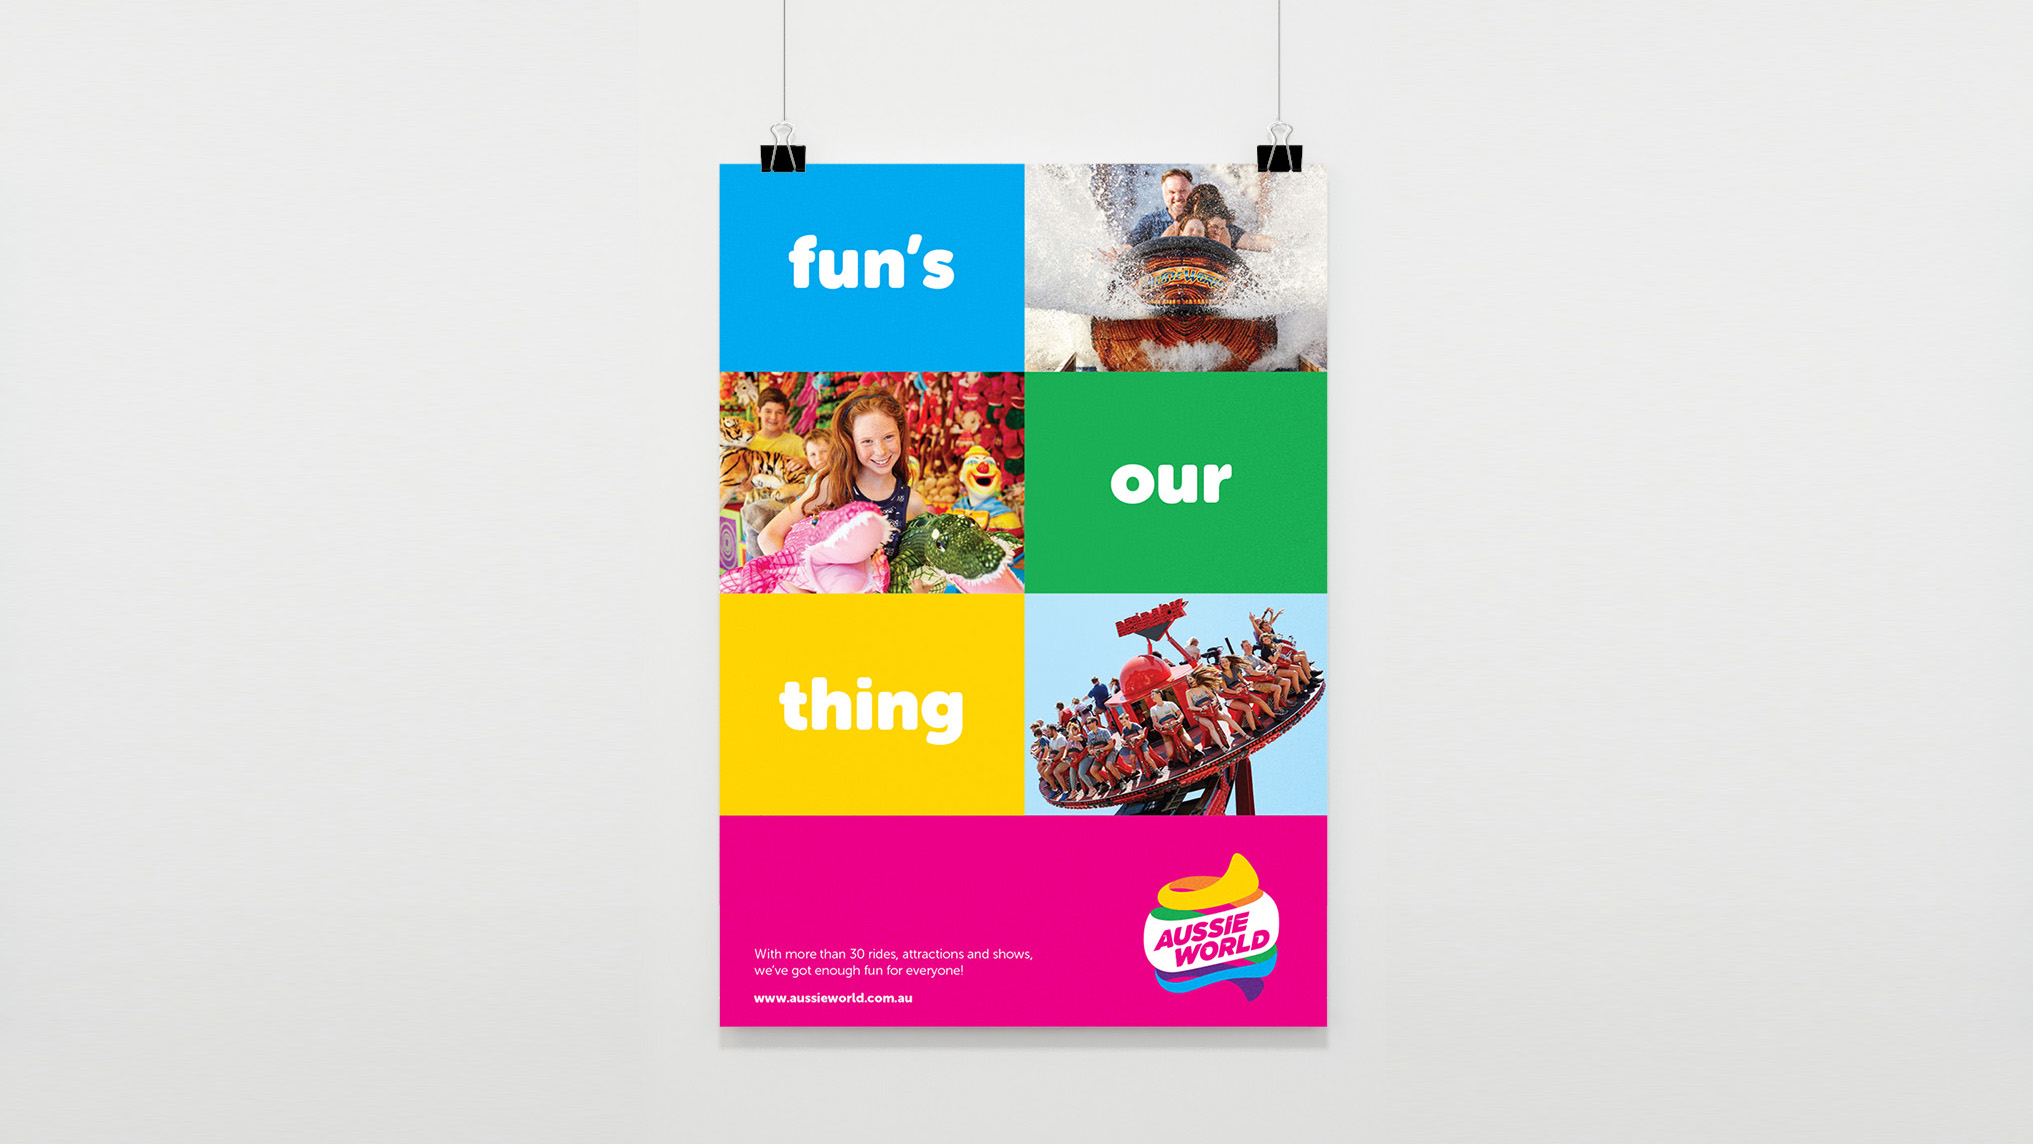 An image of a poster promoting Aussie World. The poster features various rides and attractions with the tagline 'Fun's Our Thing'.